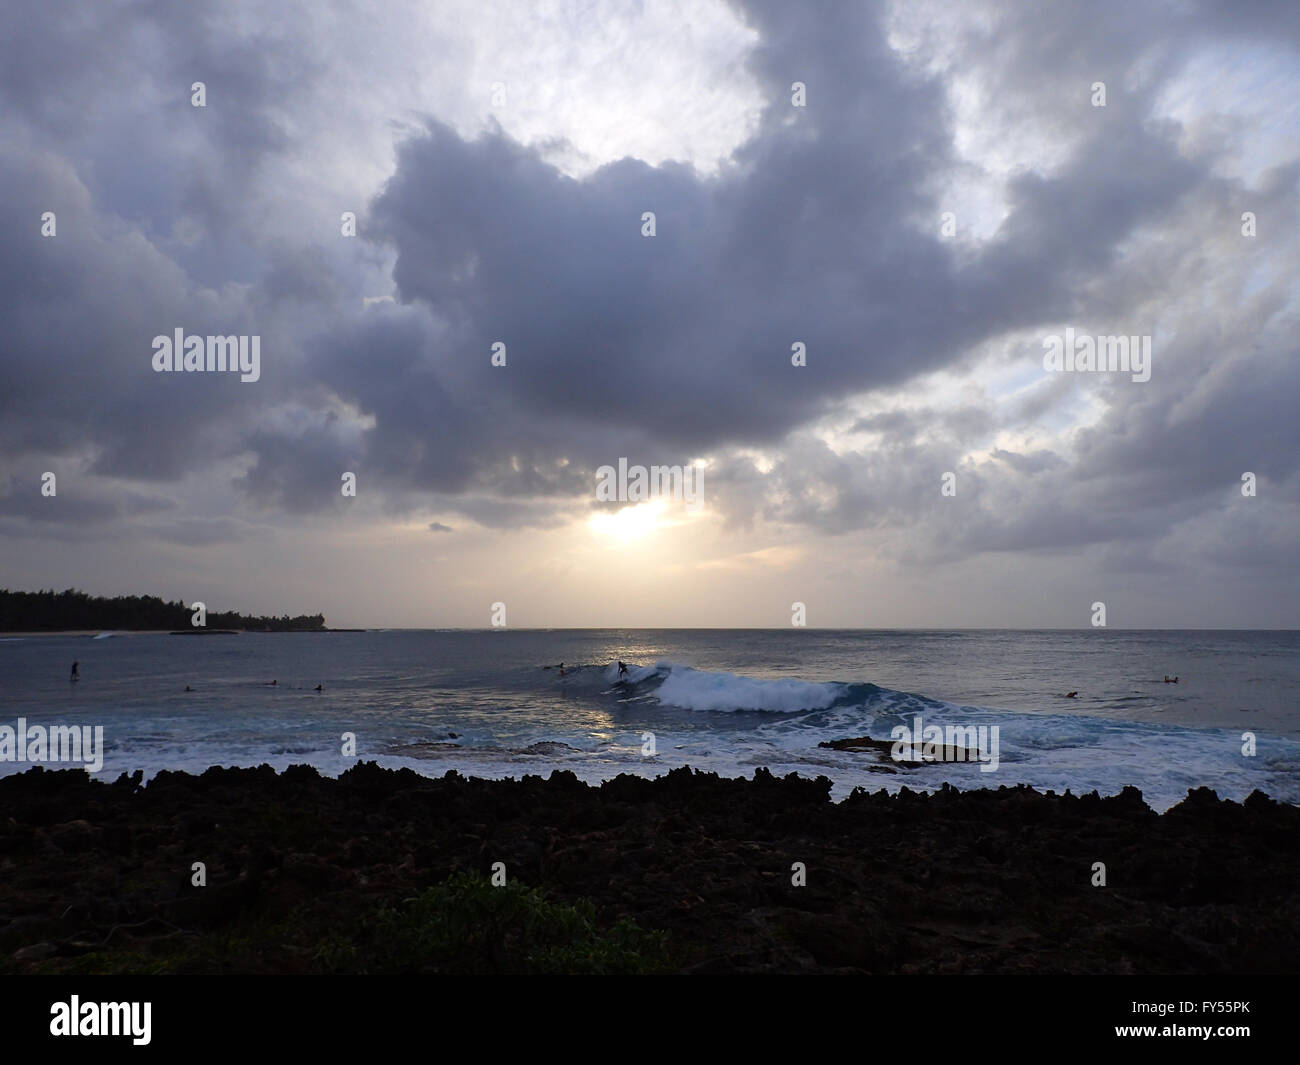 Surfers ride waves as sunsets though the clouds off the coast of Turtle Bay on the North Shore of Oahu, Hawaii. Stock Photo